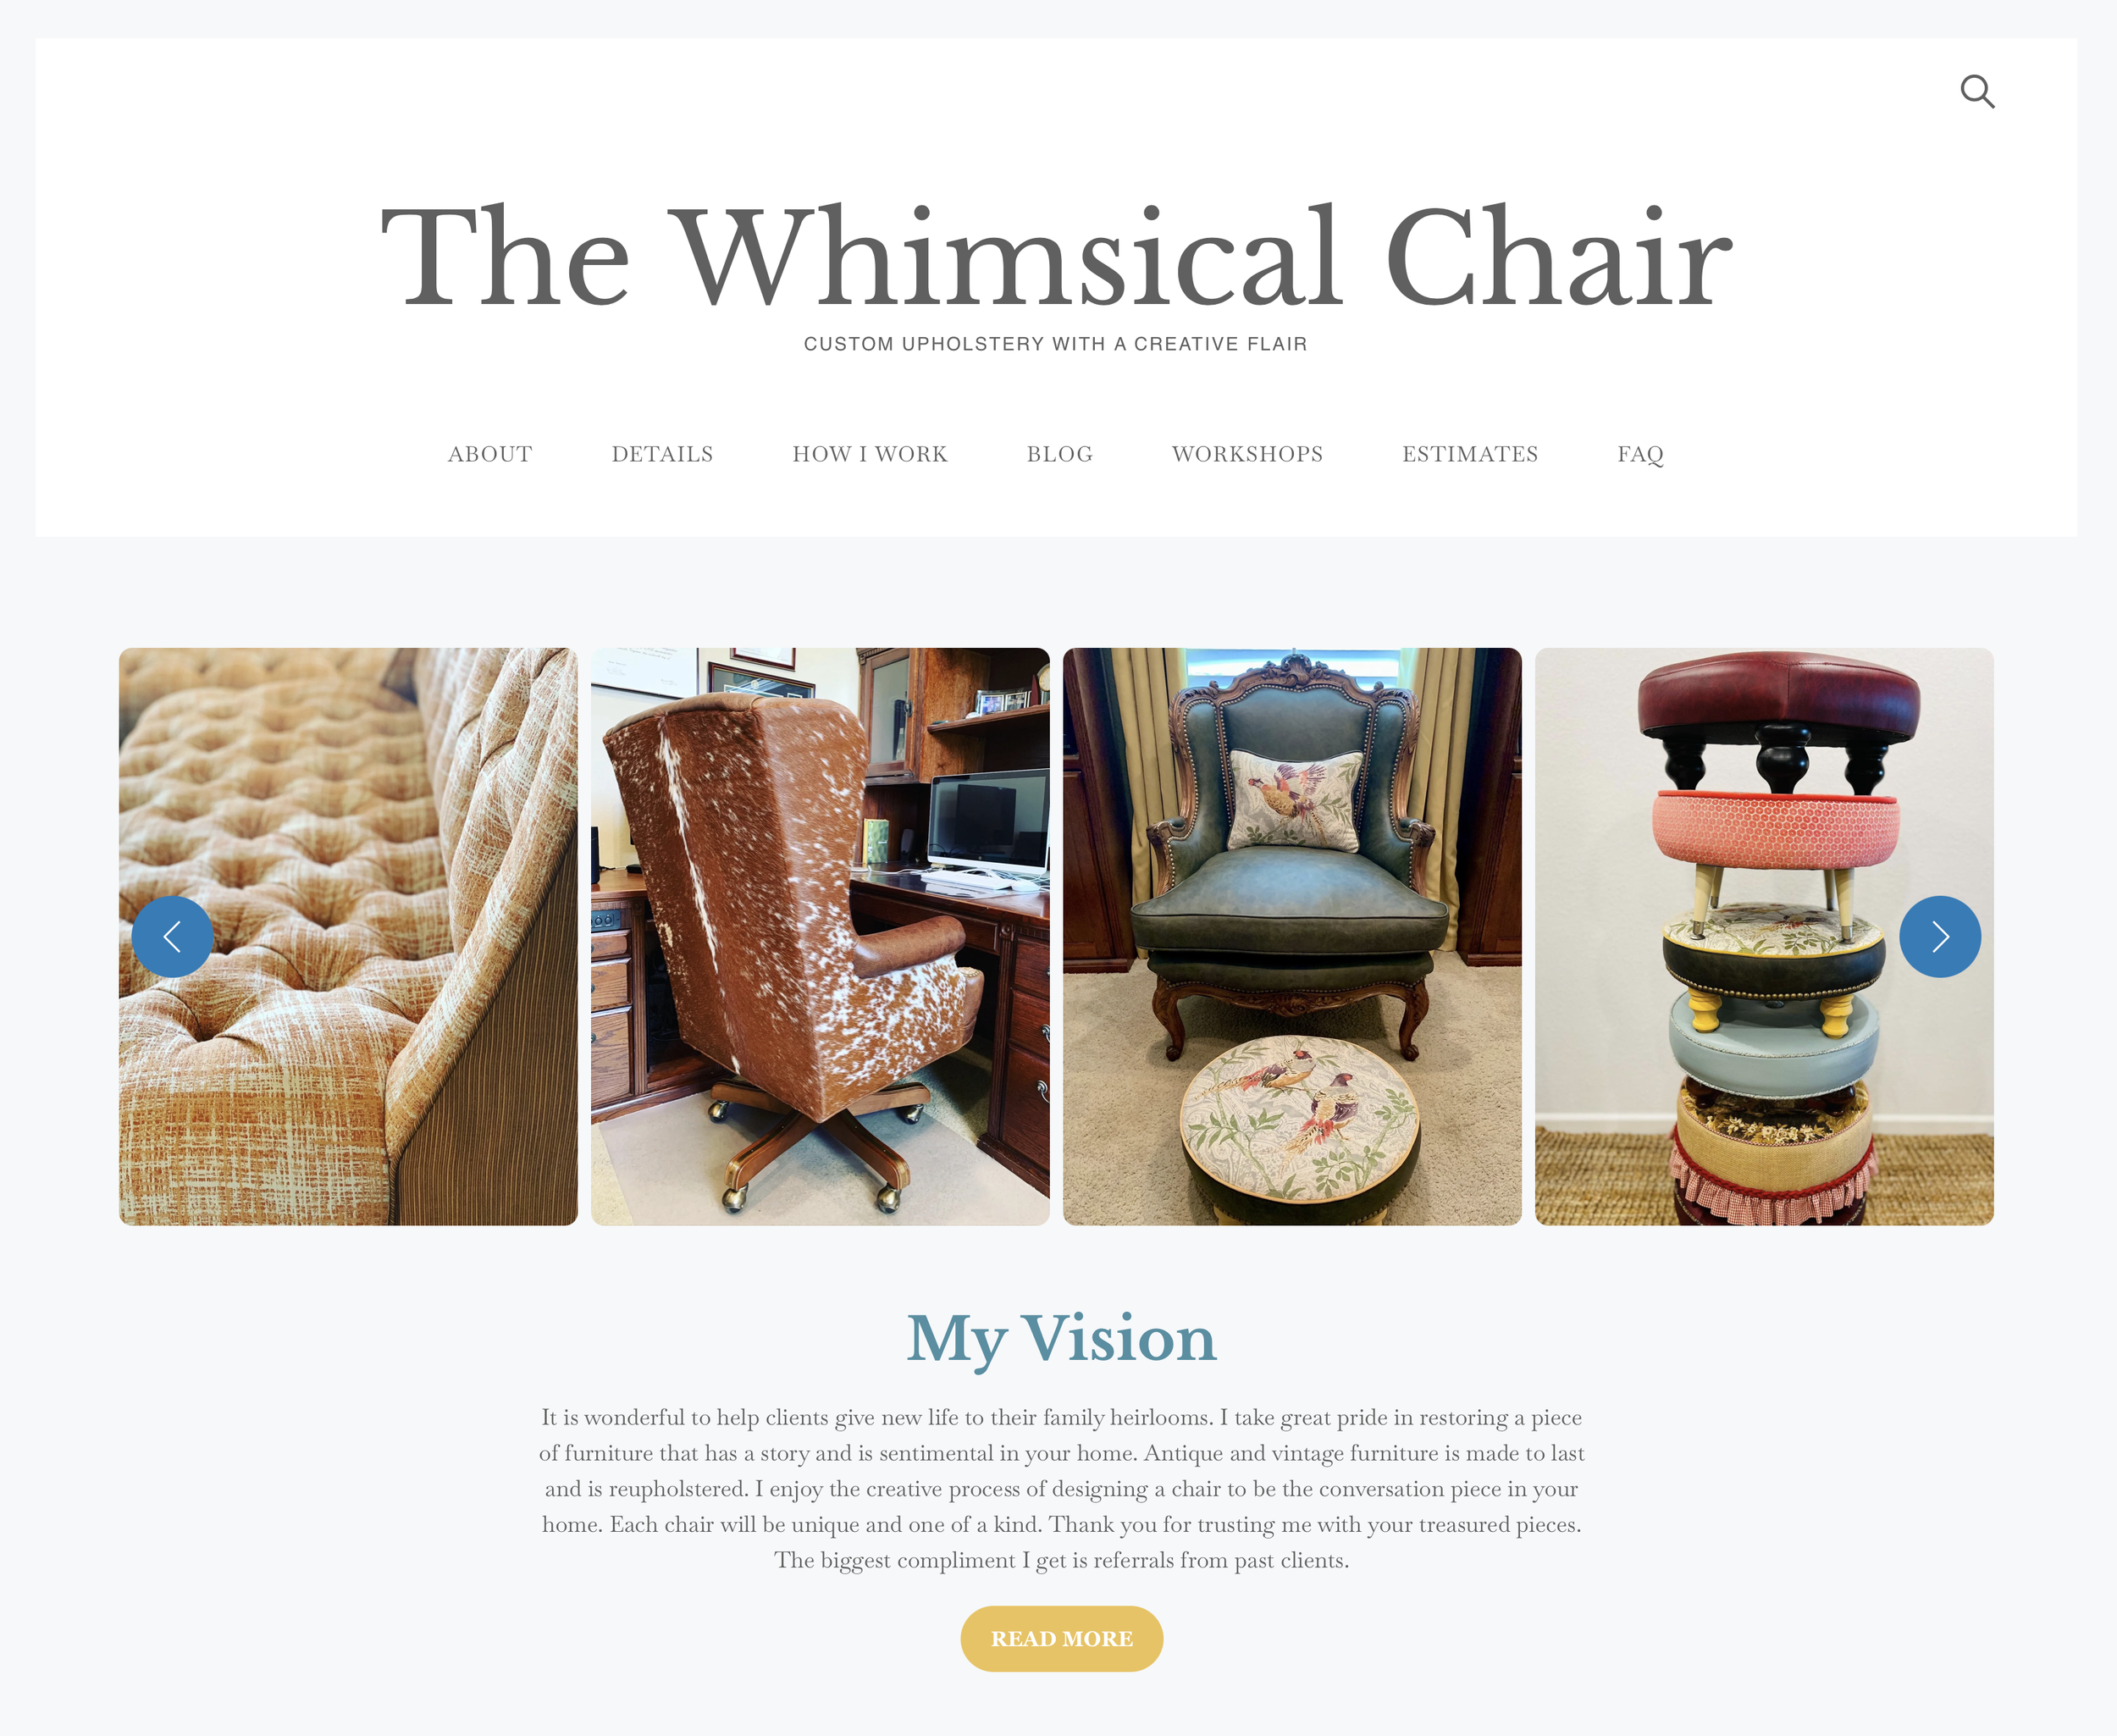 www.thewhimsicalchair.com